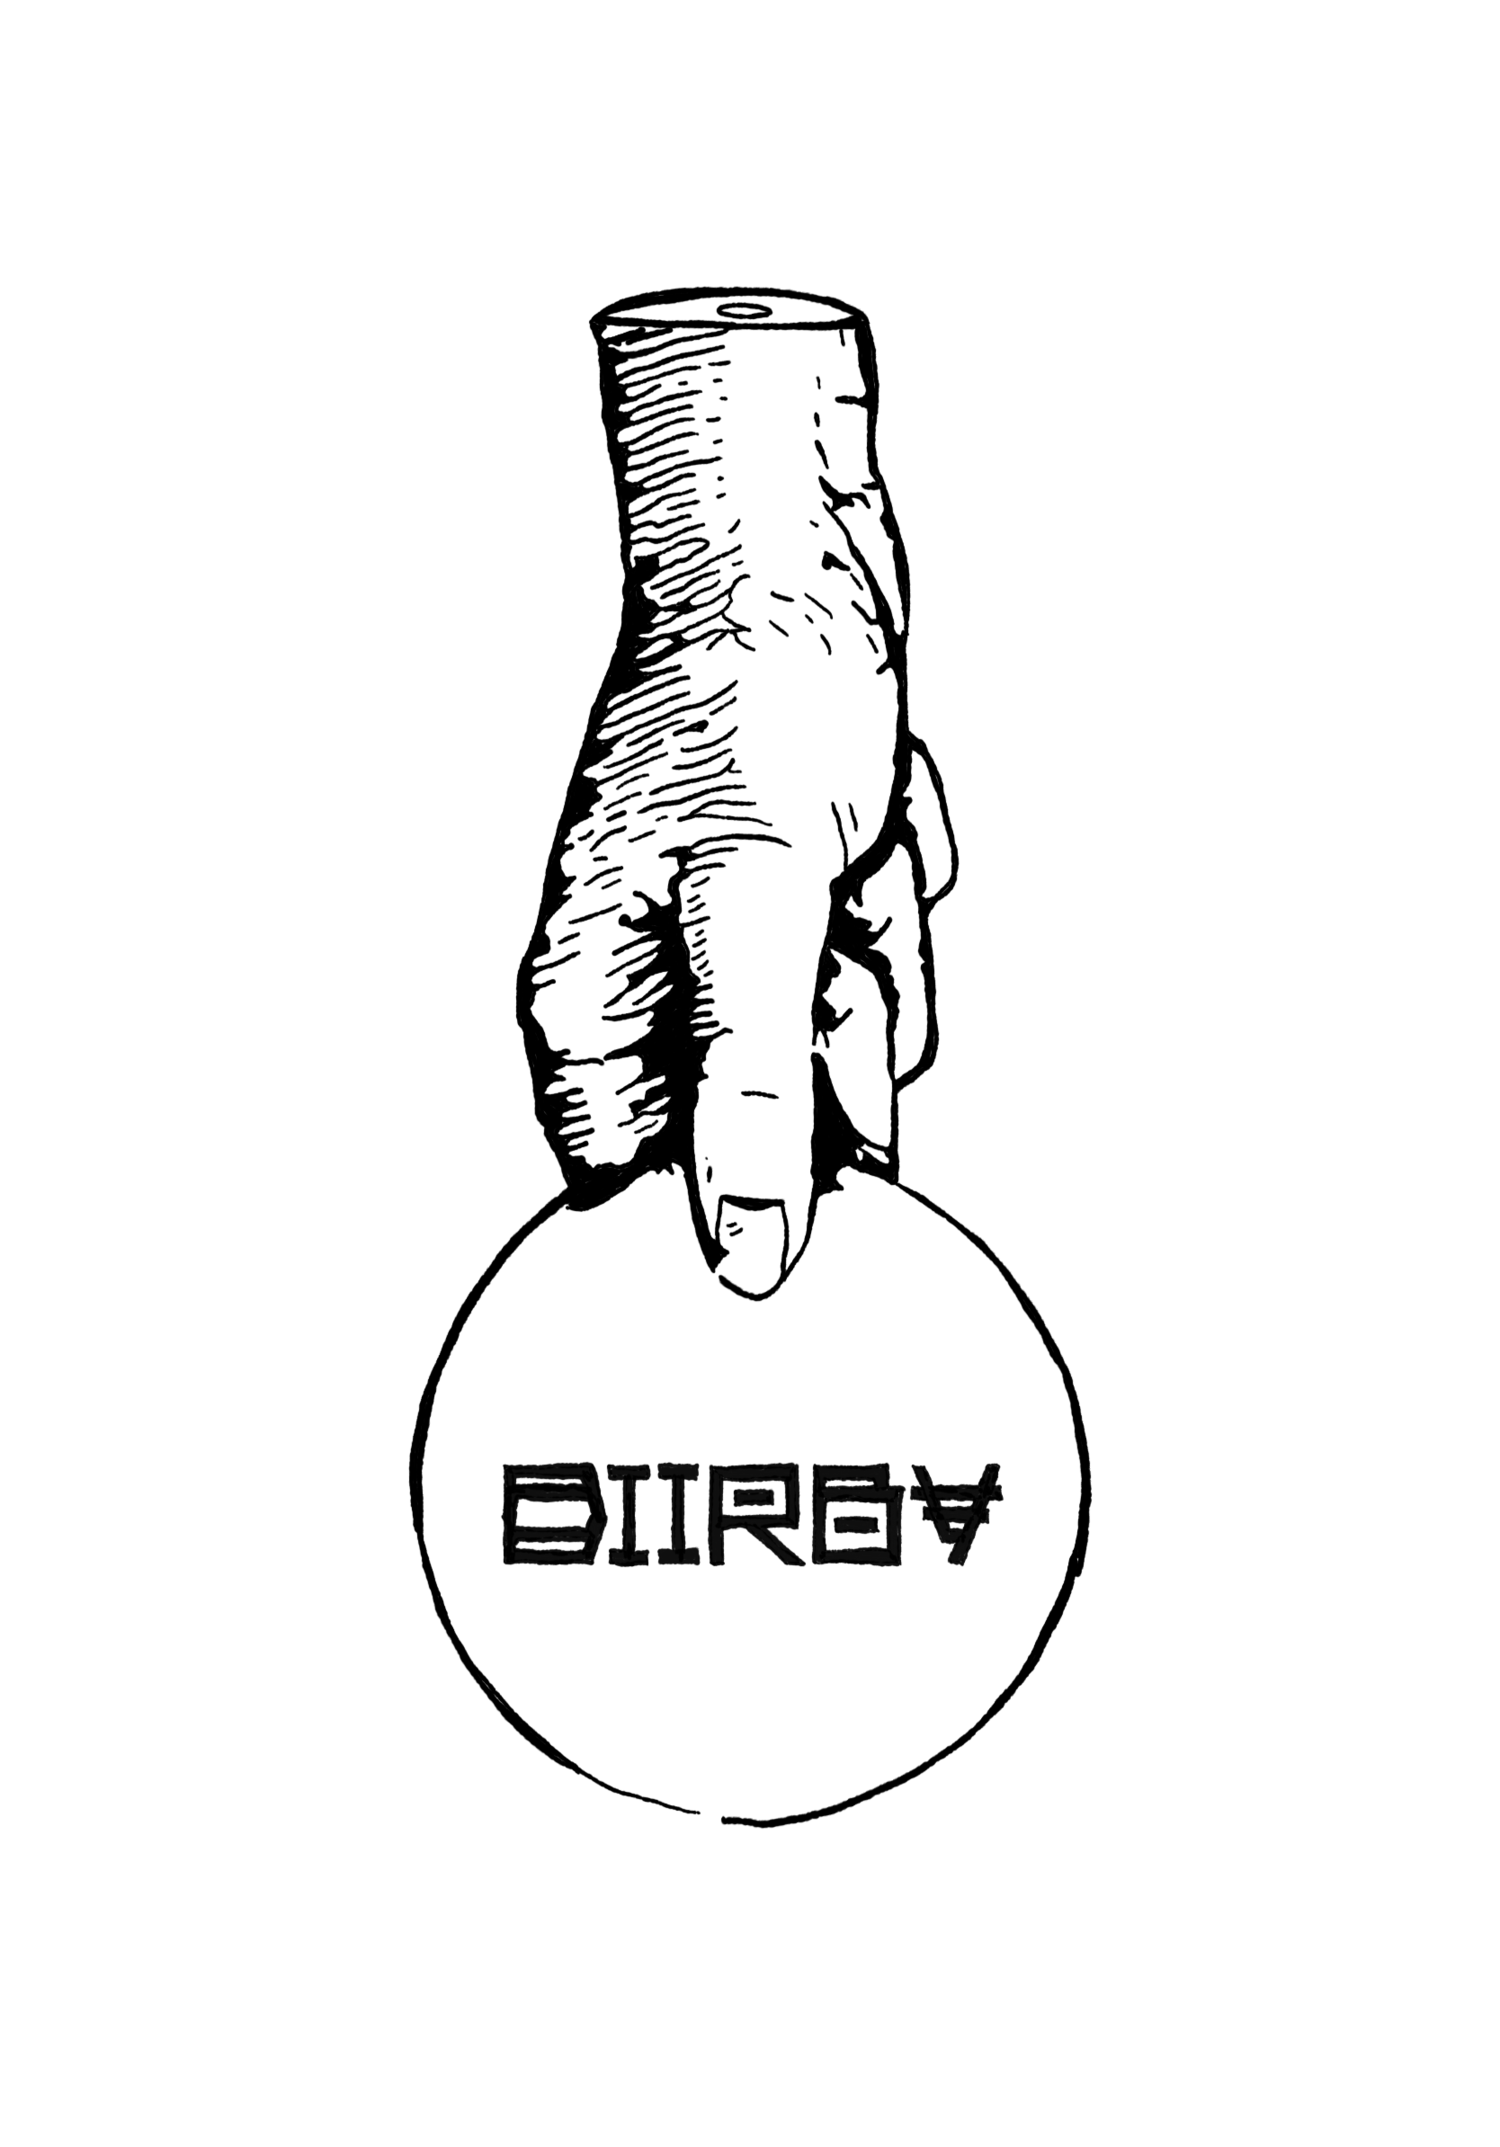 diirby